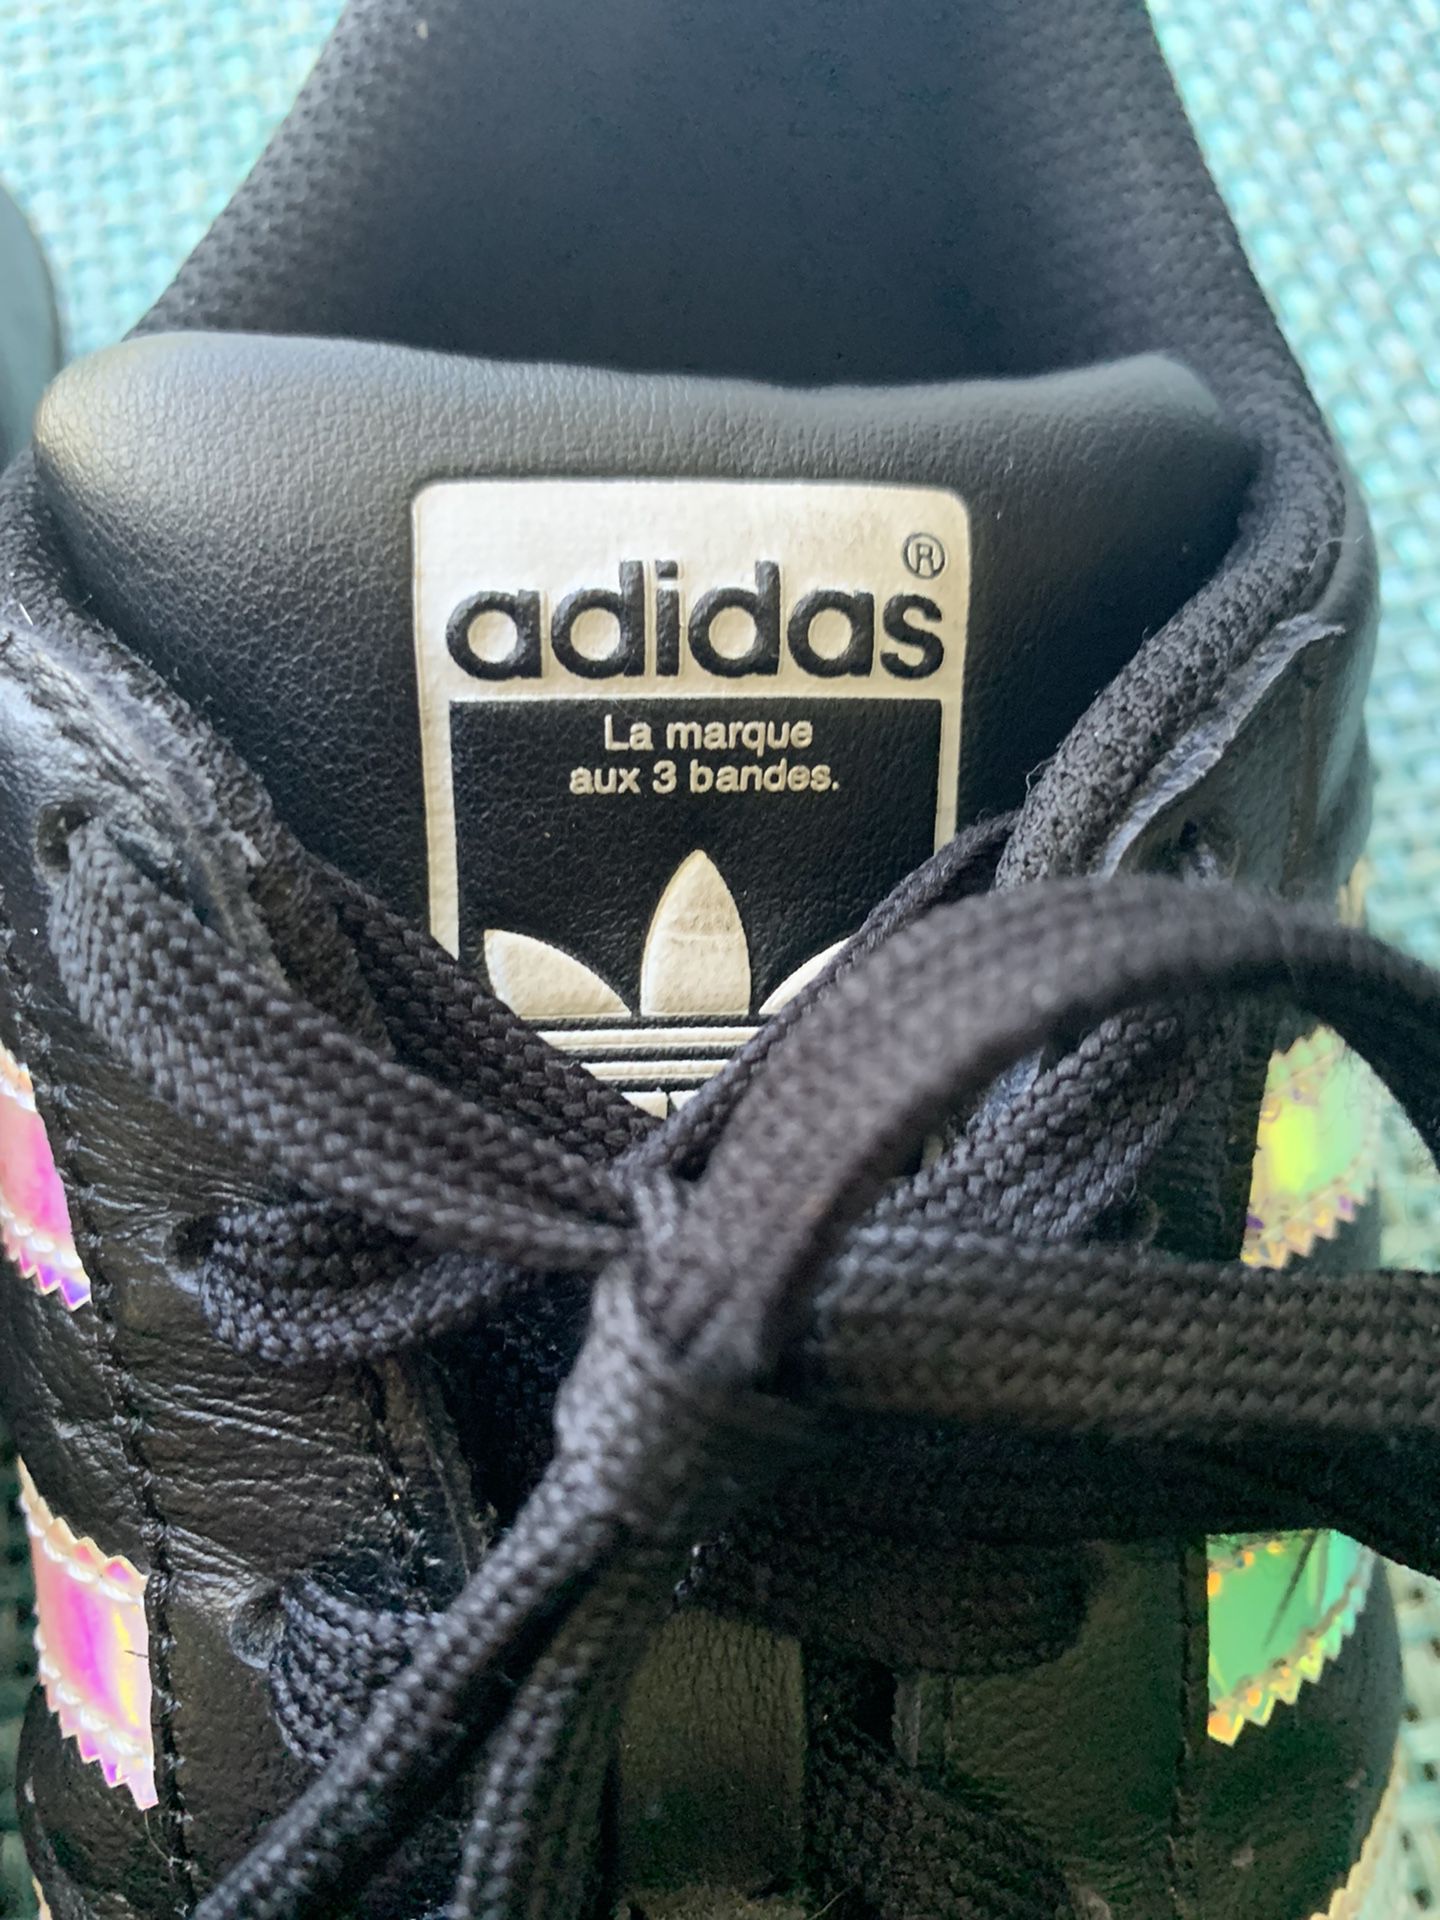 pedir Perder la paciencia Intolerable Girls 4.5 ADIDAS SuperStar Shell Toe Black w/ Iridescent Stripes for Sale  in Fort Lauderdale, FL - OfferUp